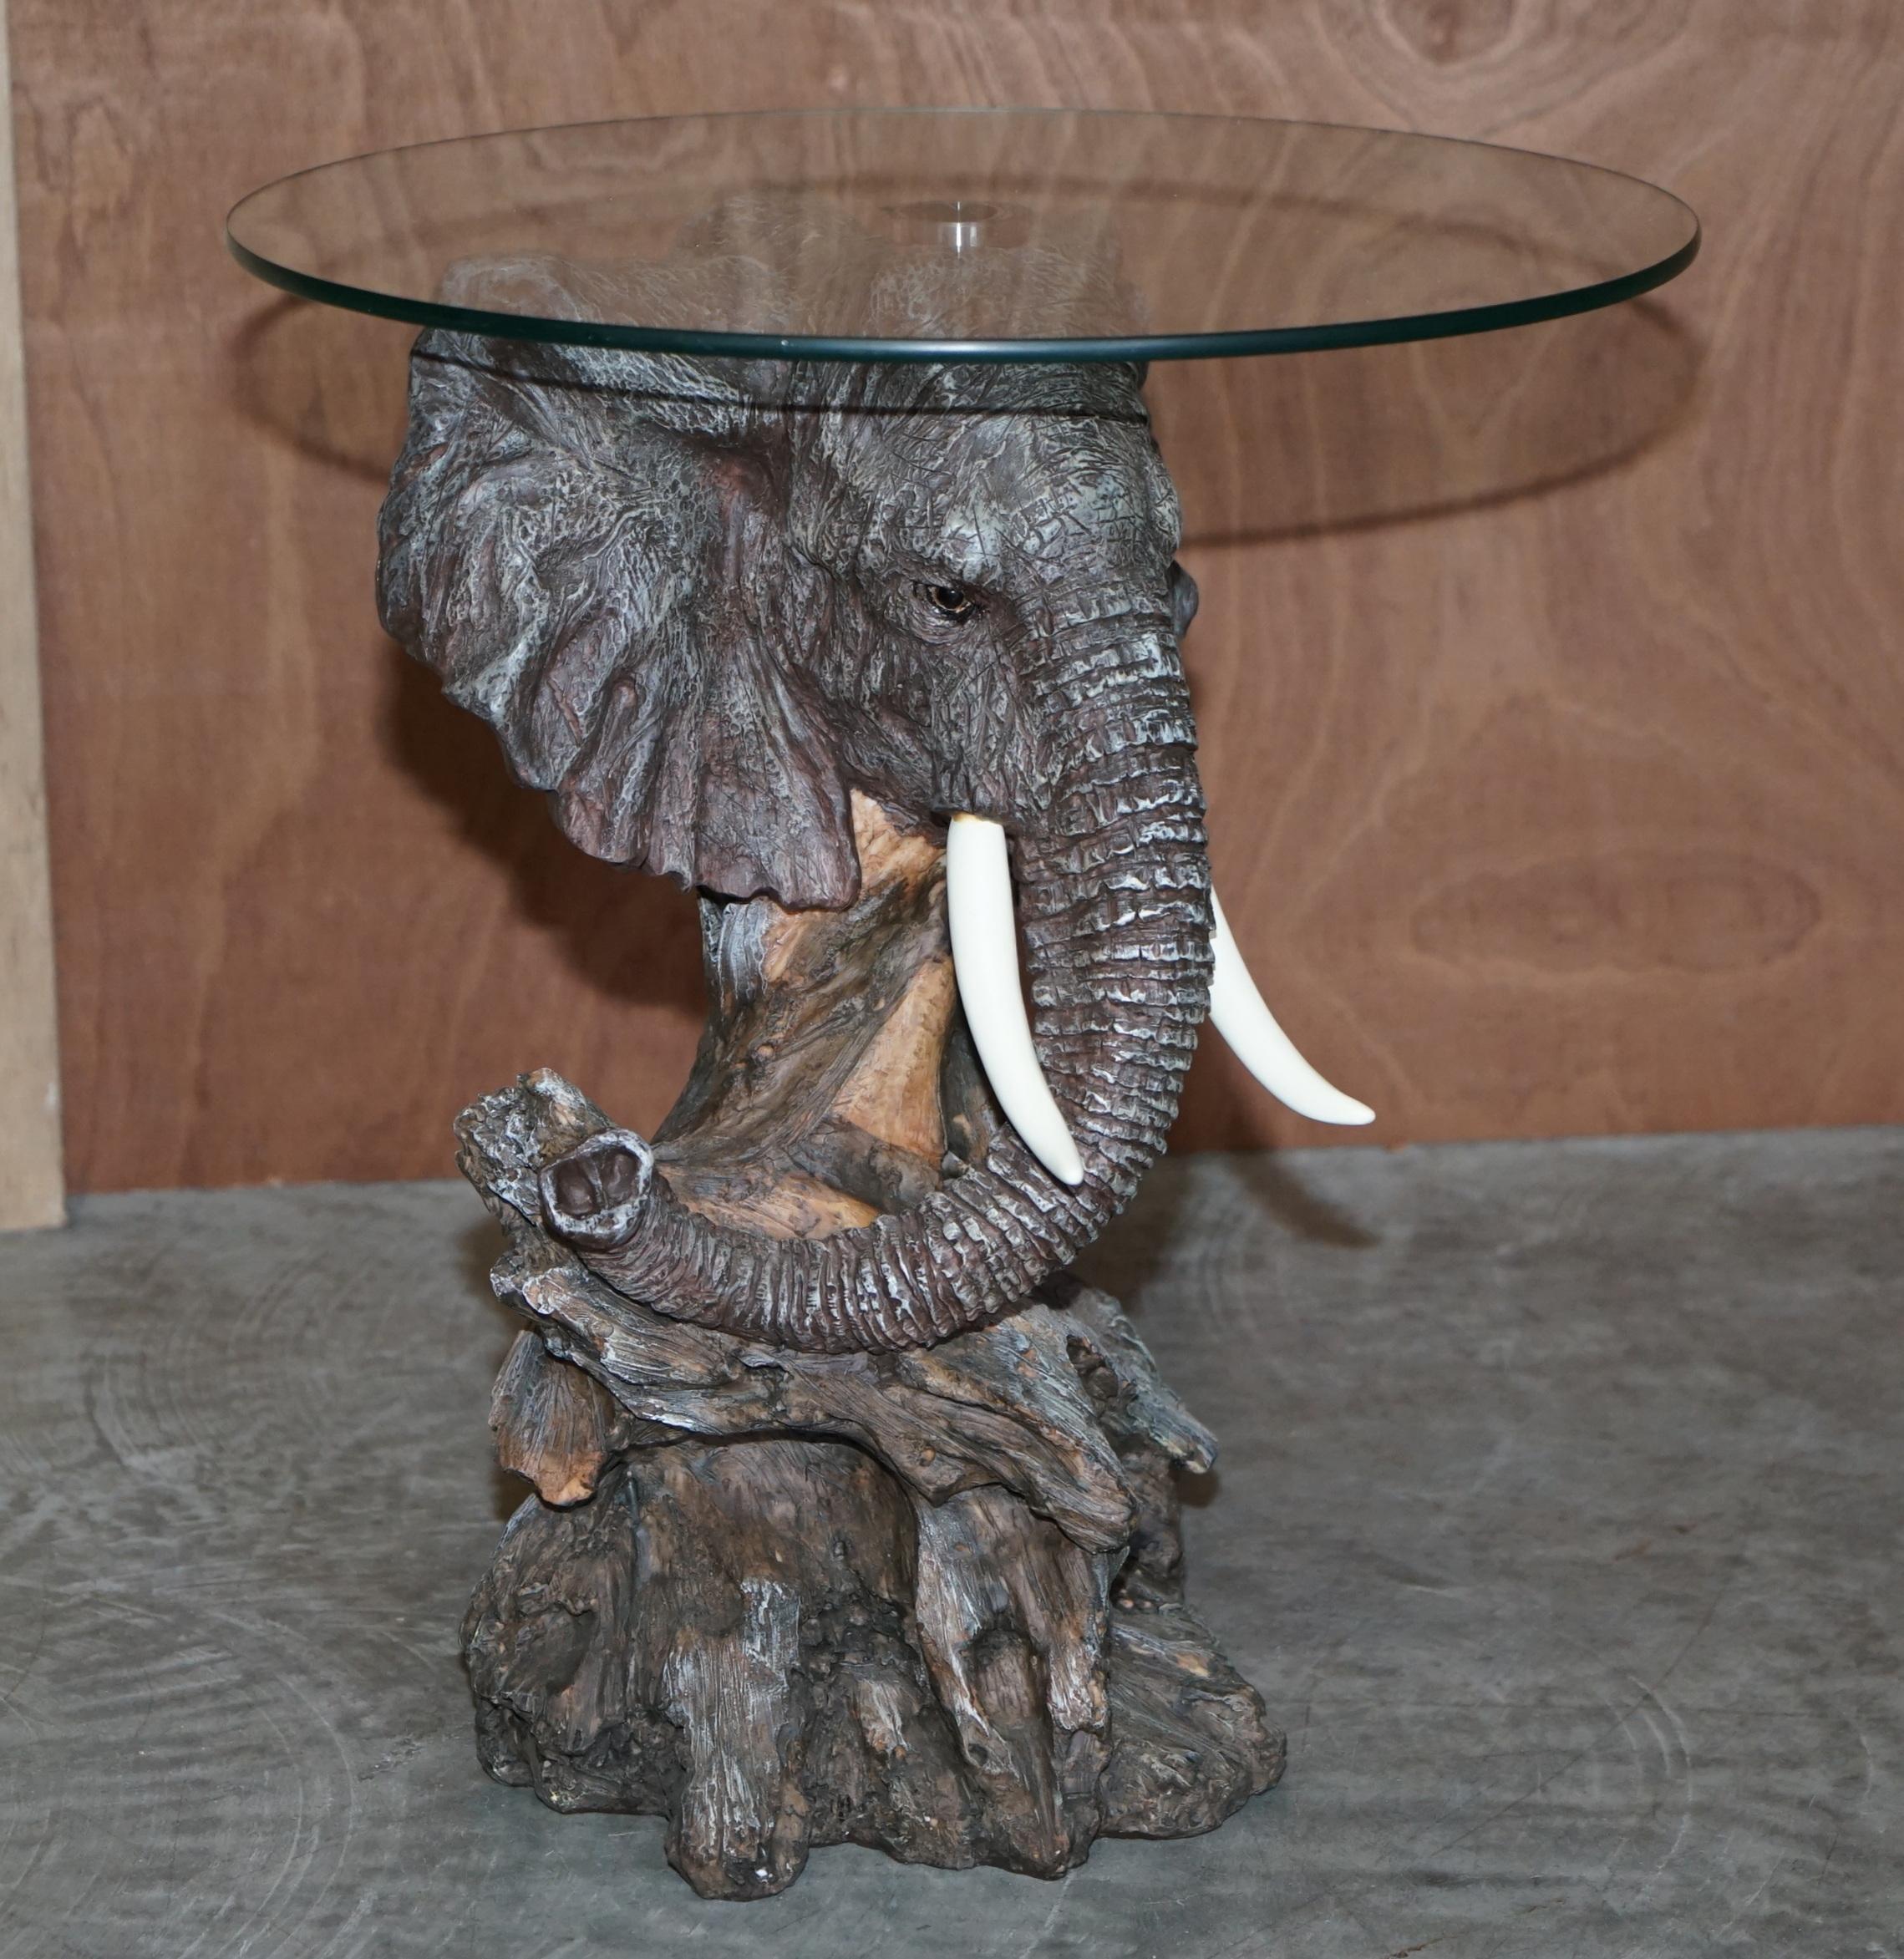 We are delighted to offer this realistically cast hand painted Elephants head side table with beautiful serene expression

A wonderful looking piece, the look in the eyes is so deep and sincere, I have never seen a piece of sculpture or art that